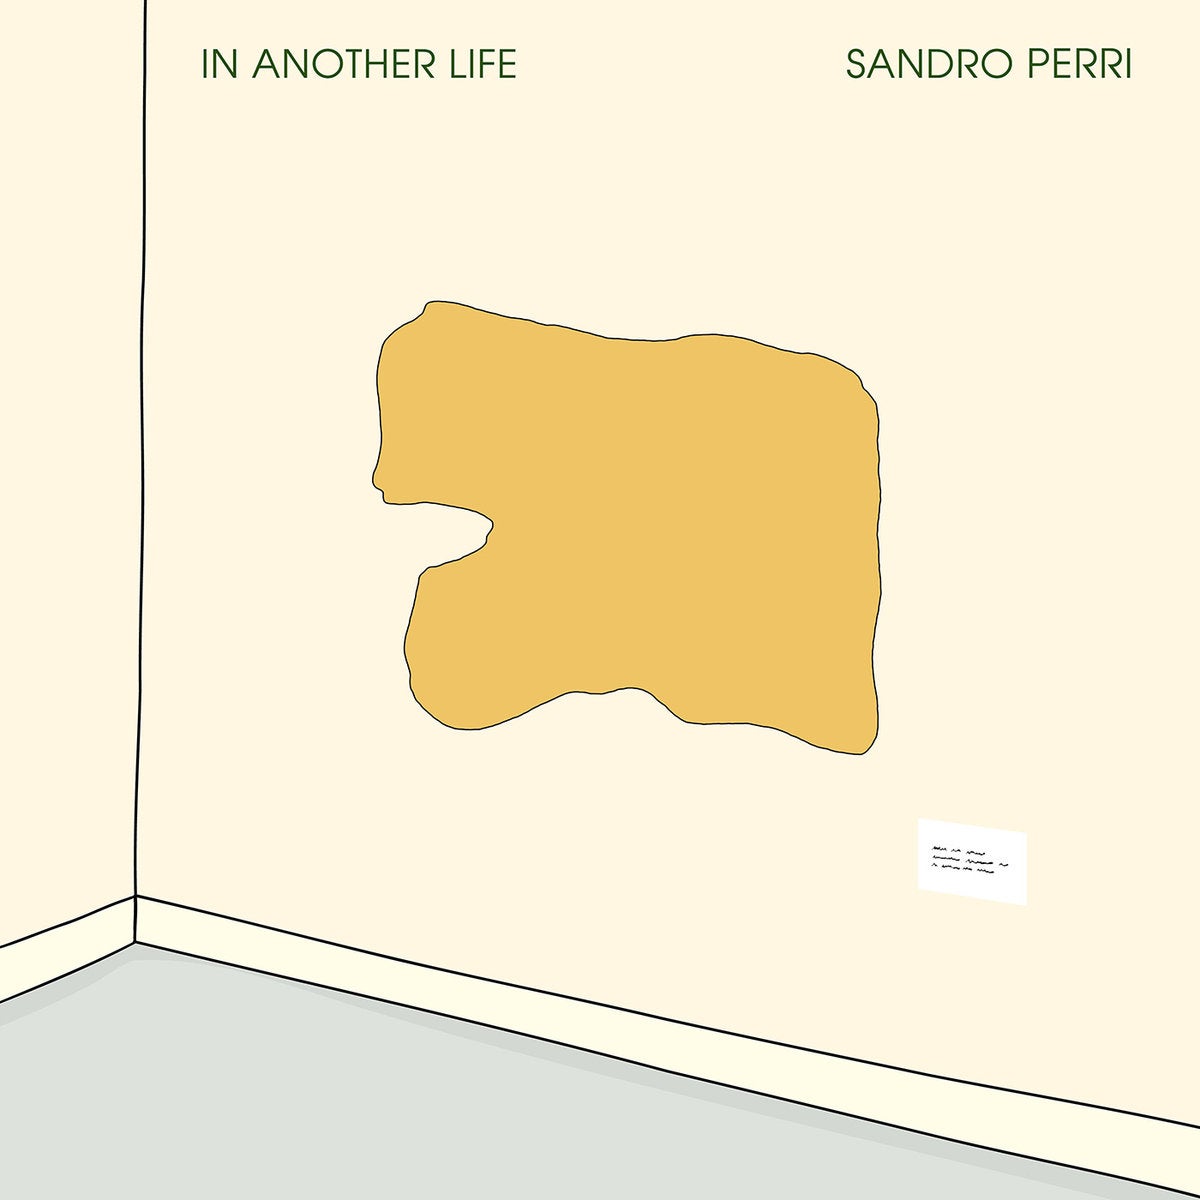 The cover for Sandro Perri's In Another Life.